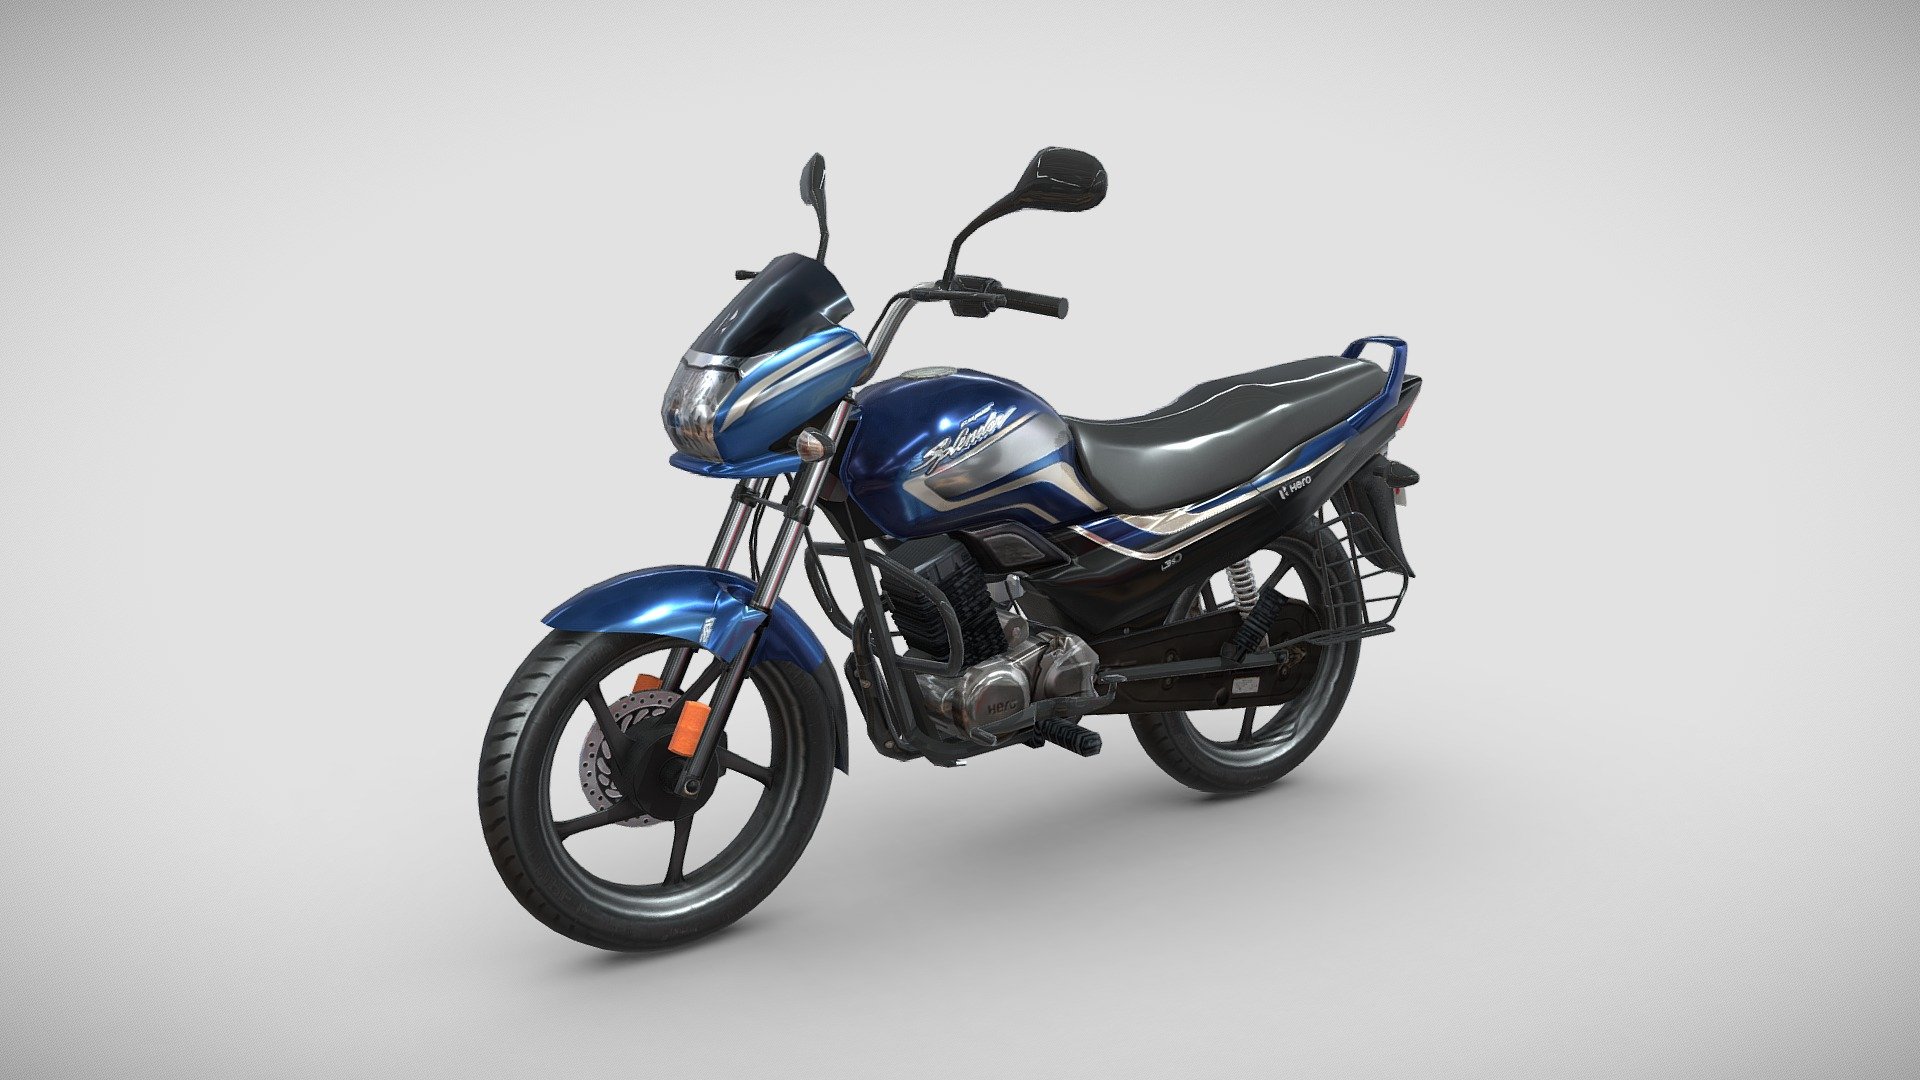 Introducing the Hero Super Splendor 3D model.
The Hero Super Splendor is a popular commuter motorcycle manufactured by Hero MotoCorp, an Indian motorcycle company.
Model Type: Polygonal
Polygons: 17,054
Vertices: 17,20
Formats available: Maya ASCII 2018, Maya Binary 2018, FBX , OBJ
Textures: Color, Normal, Height, Metallic, Roughness, and Opacity maps
Texture Resolution: 4096 x 4096 pixels
Due to its moderate polygon count, the model strikes a balance between detail and performance, making it suitable for use in a wide range of applications.
The model is compatible with a variety of 3D software and can be easily integrated into different platforms.
So, it's the perfect addition to your collection.
I plan on making more bikes in the future.

Hope you like it! - Hero Super Splendor - Buy Royalty Free 3D model by Bhavik_Suthar 3d model